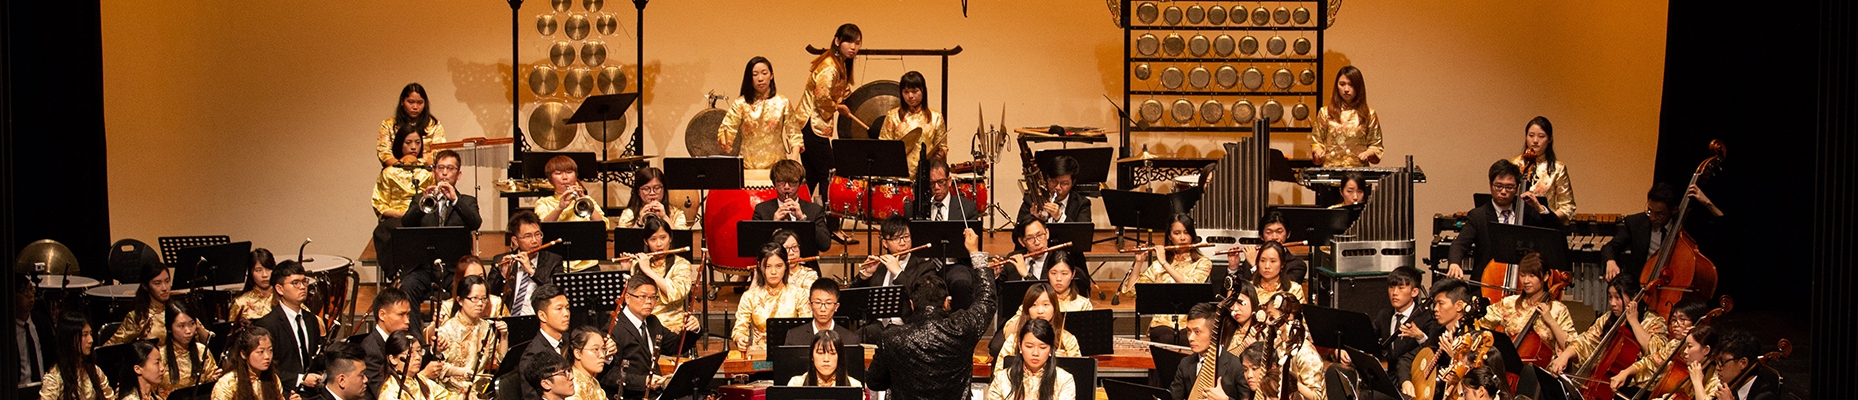 EdUHK Chinese Orchestra Annual Concert 2018_2_edit